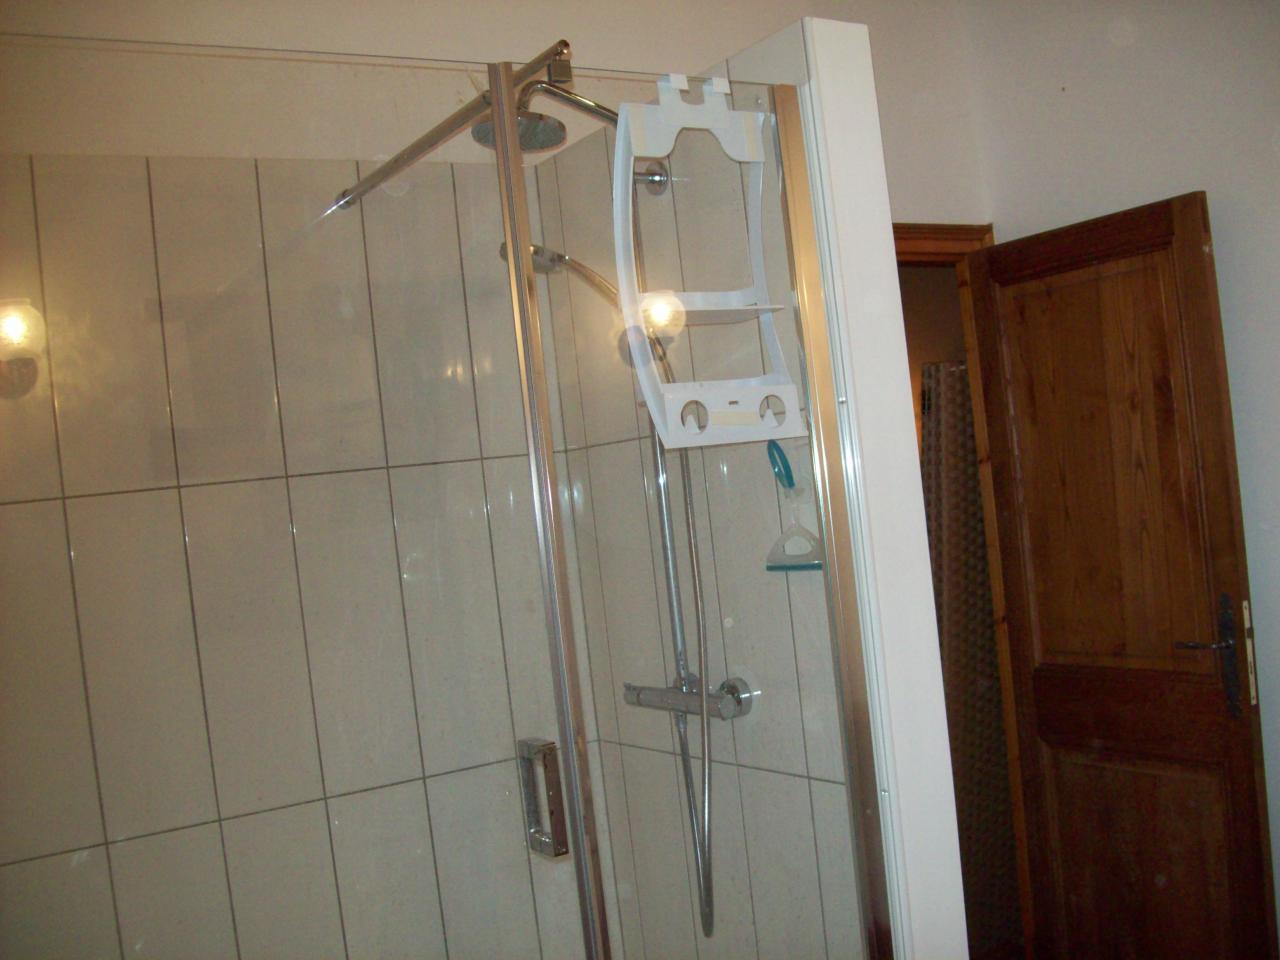 downstairs shower room